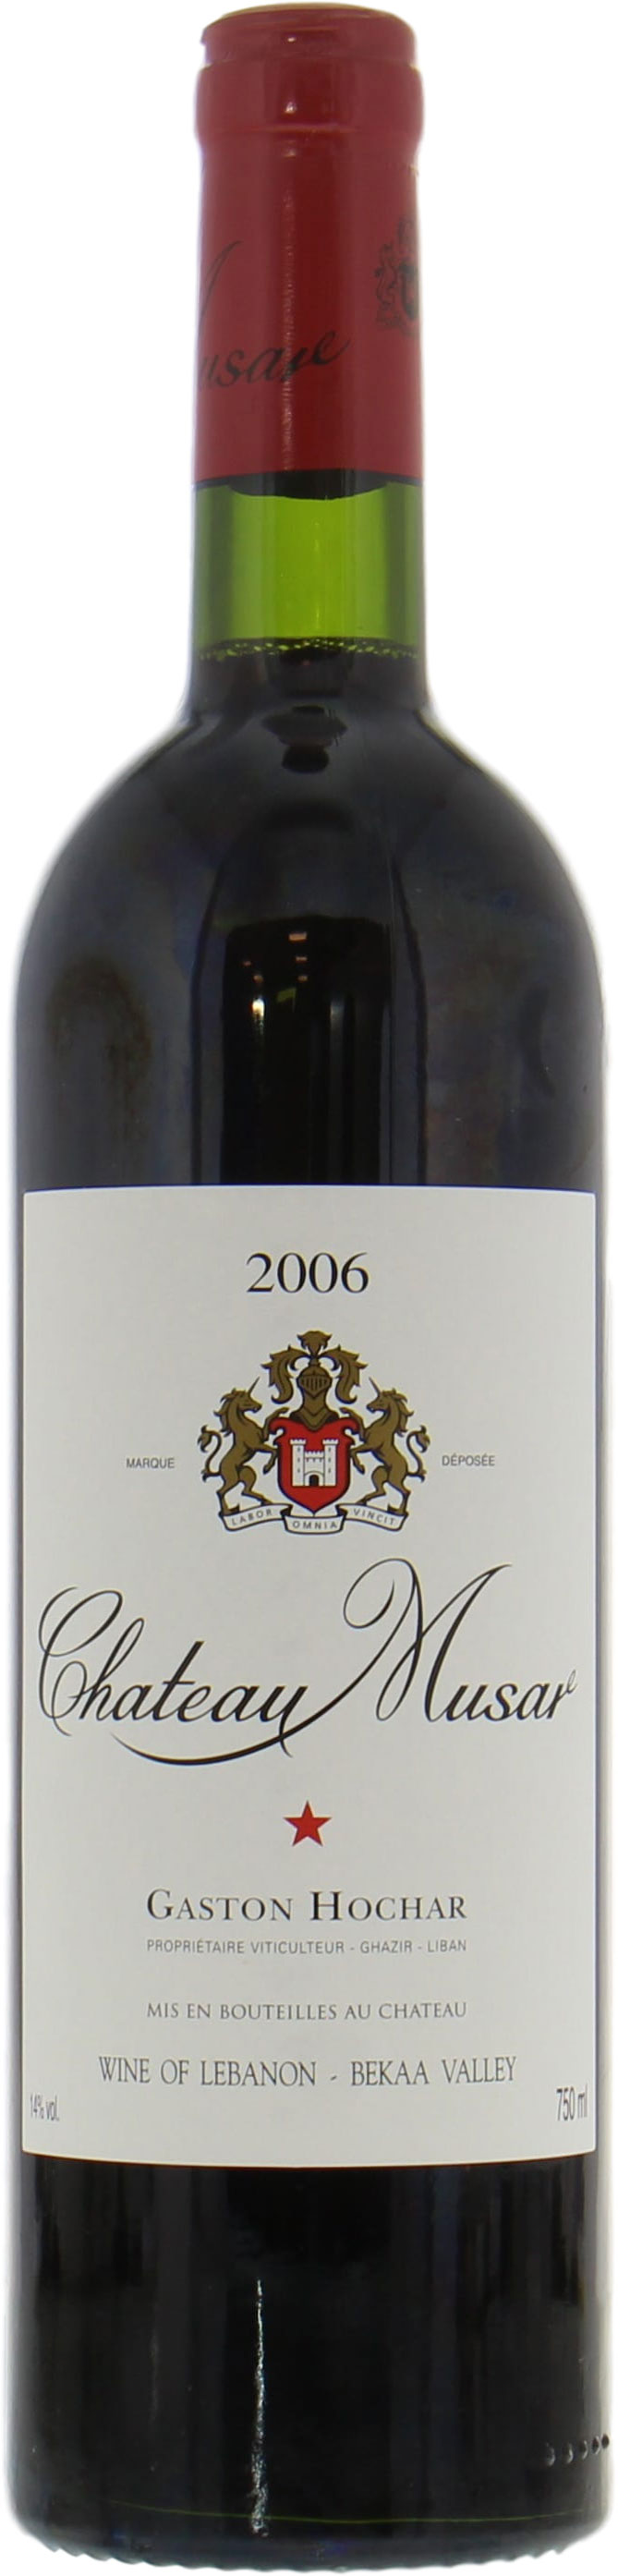 Chateau Musar - Chateau Musar 2006 Perfect